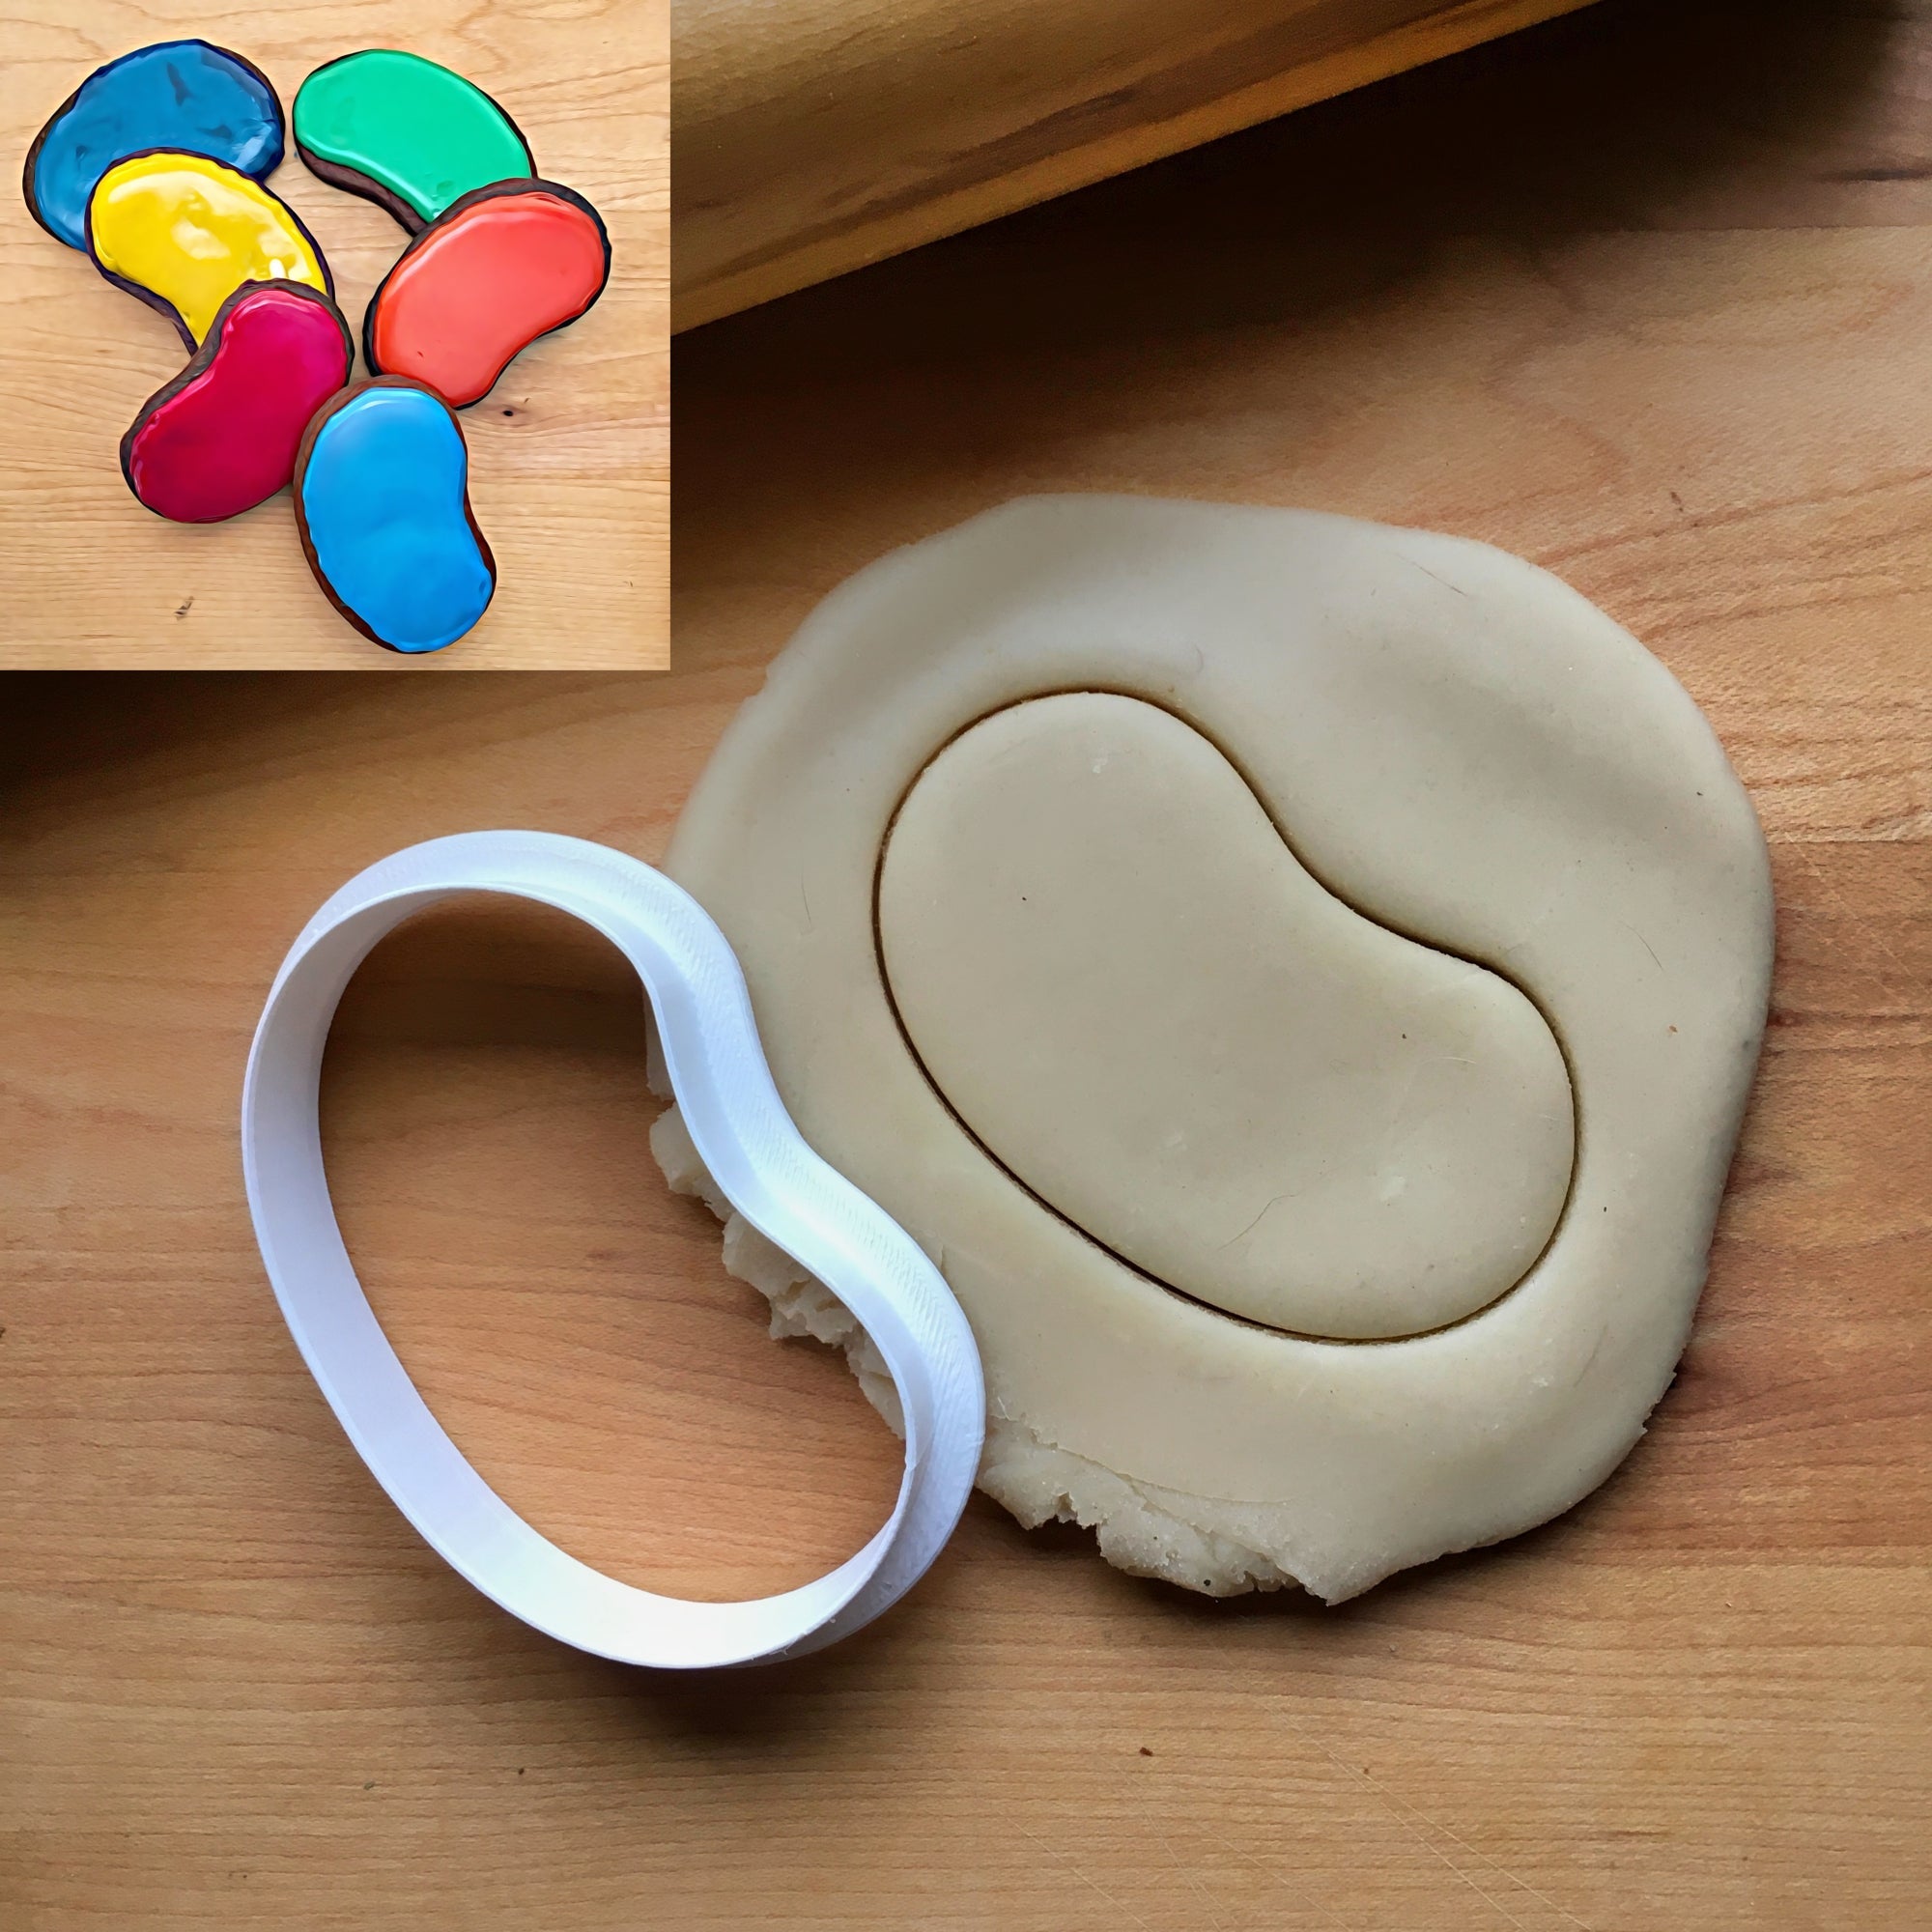 Jelly Bean Cookie Cutter/Dishwasher Safe